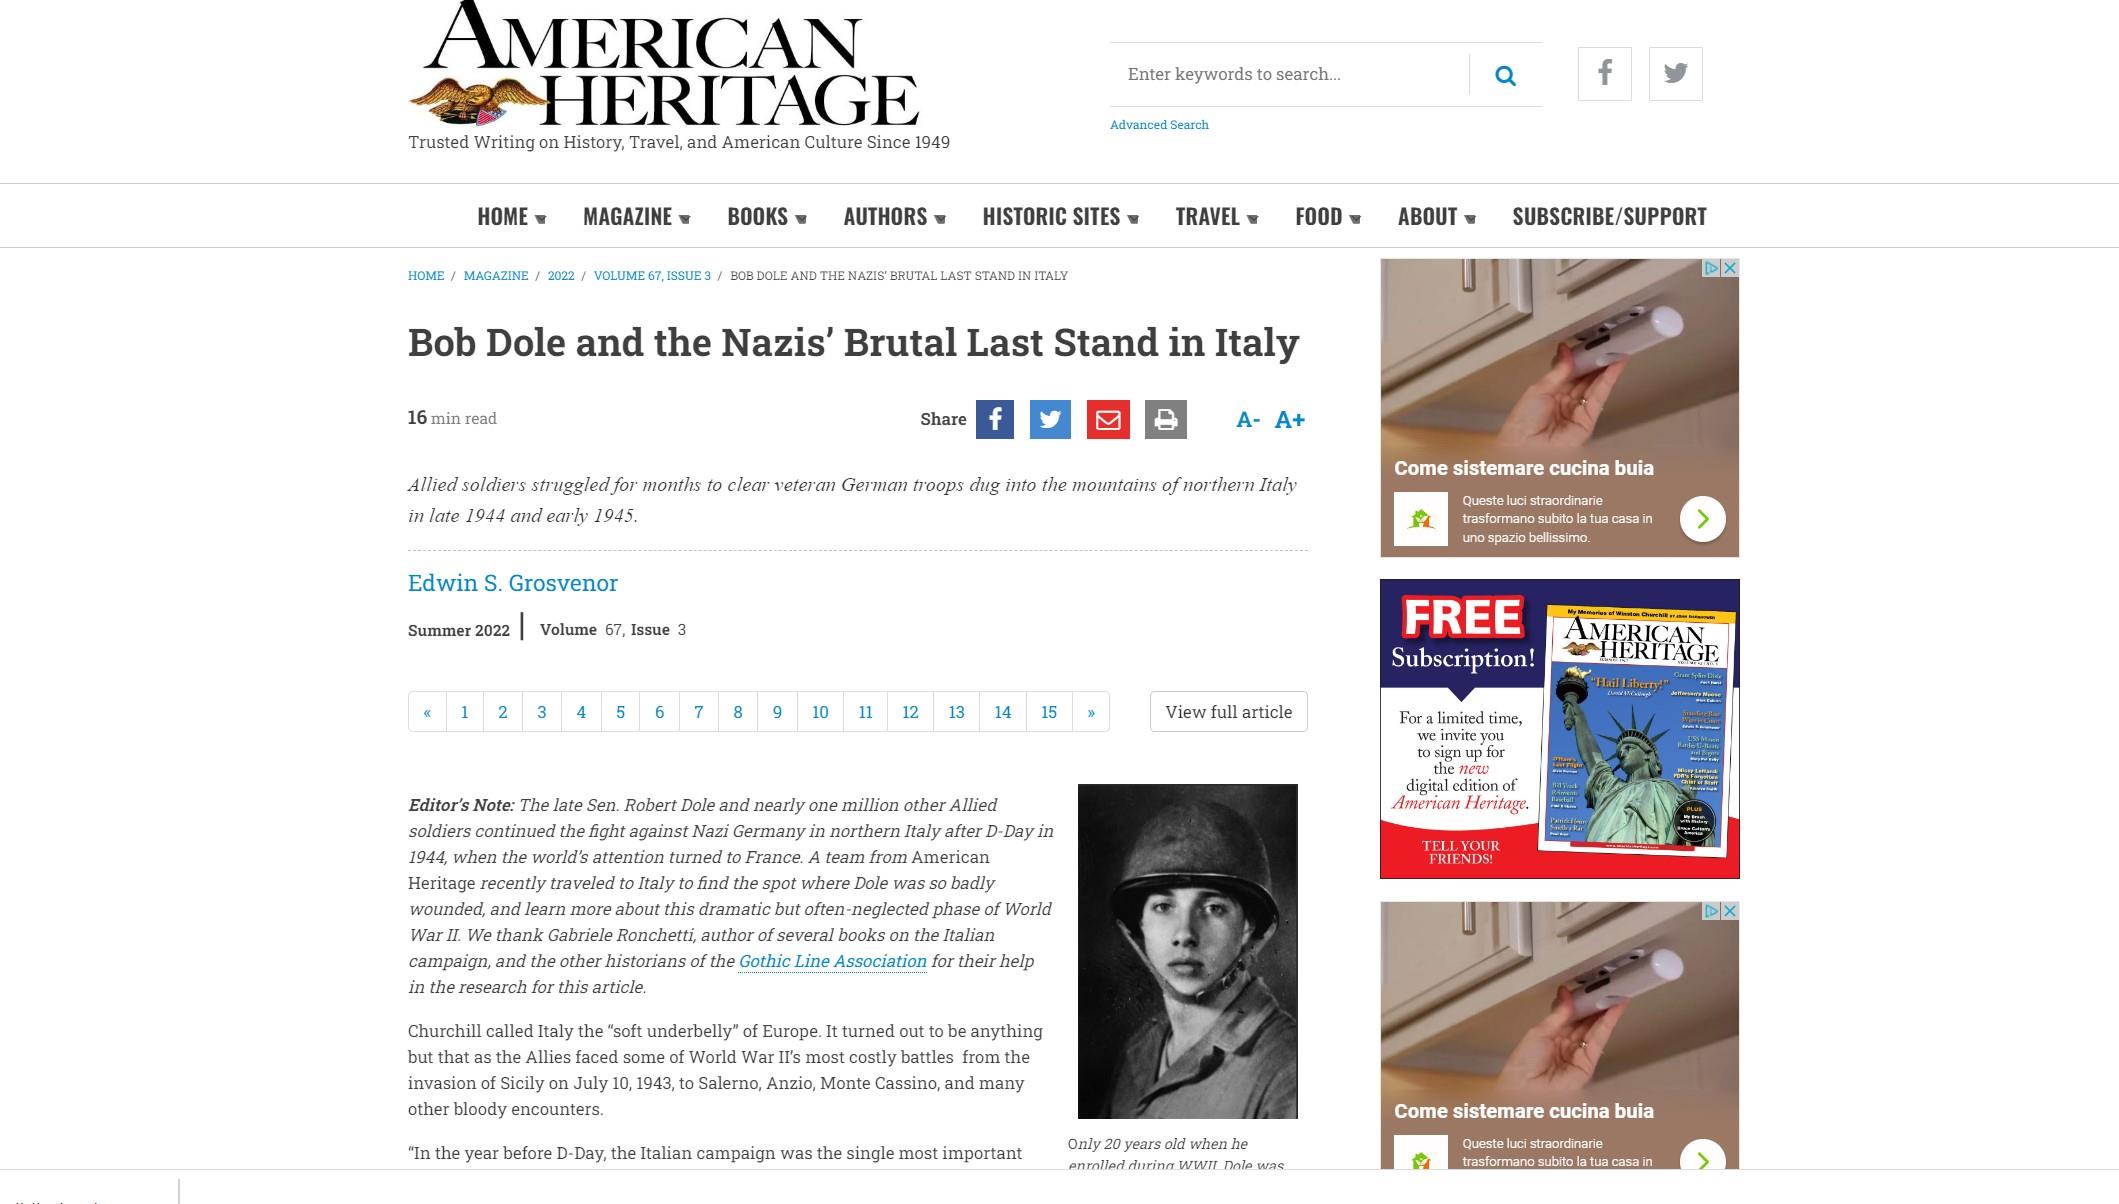 Bob Dole and the Nazis’ Brutal Last Stand in Italy